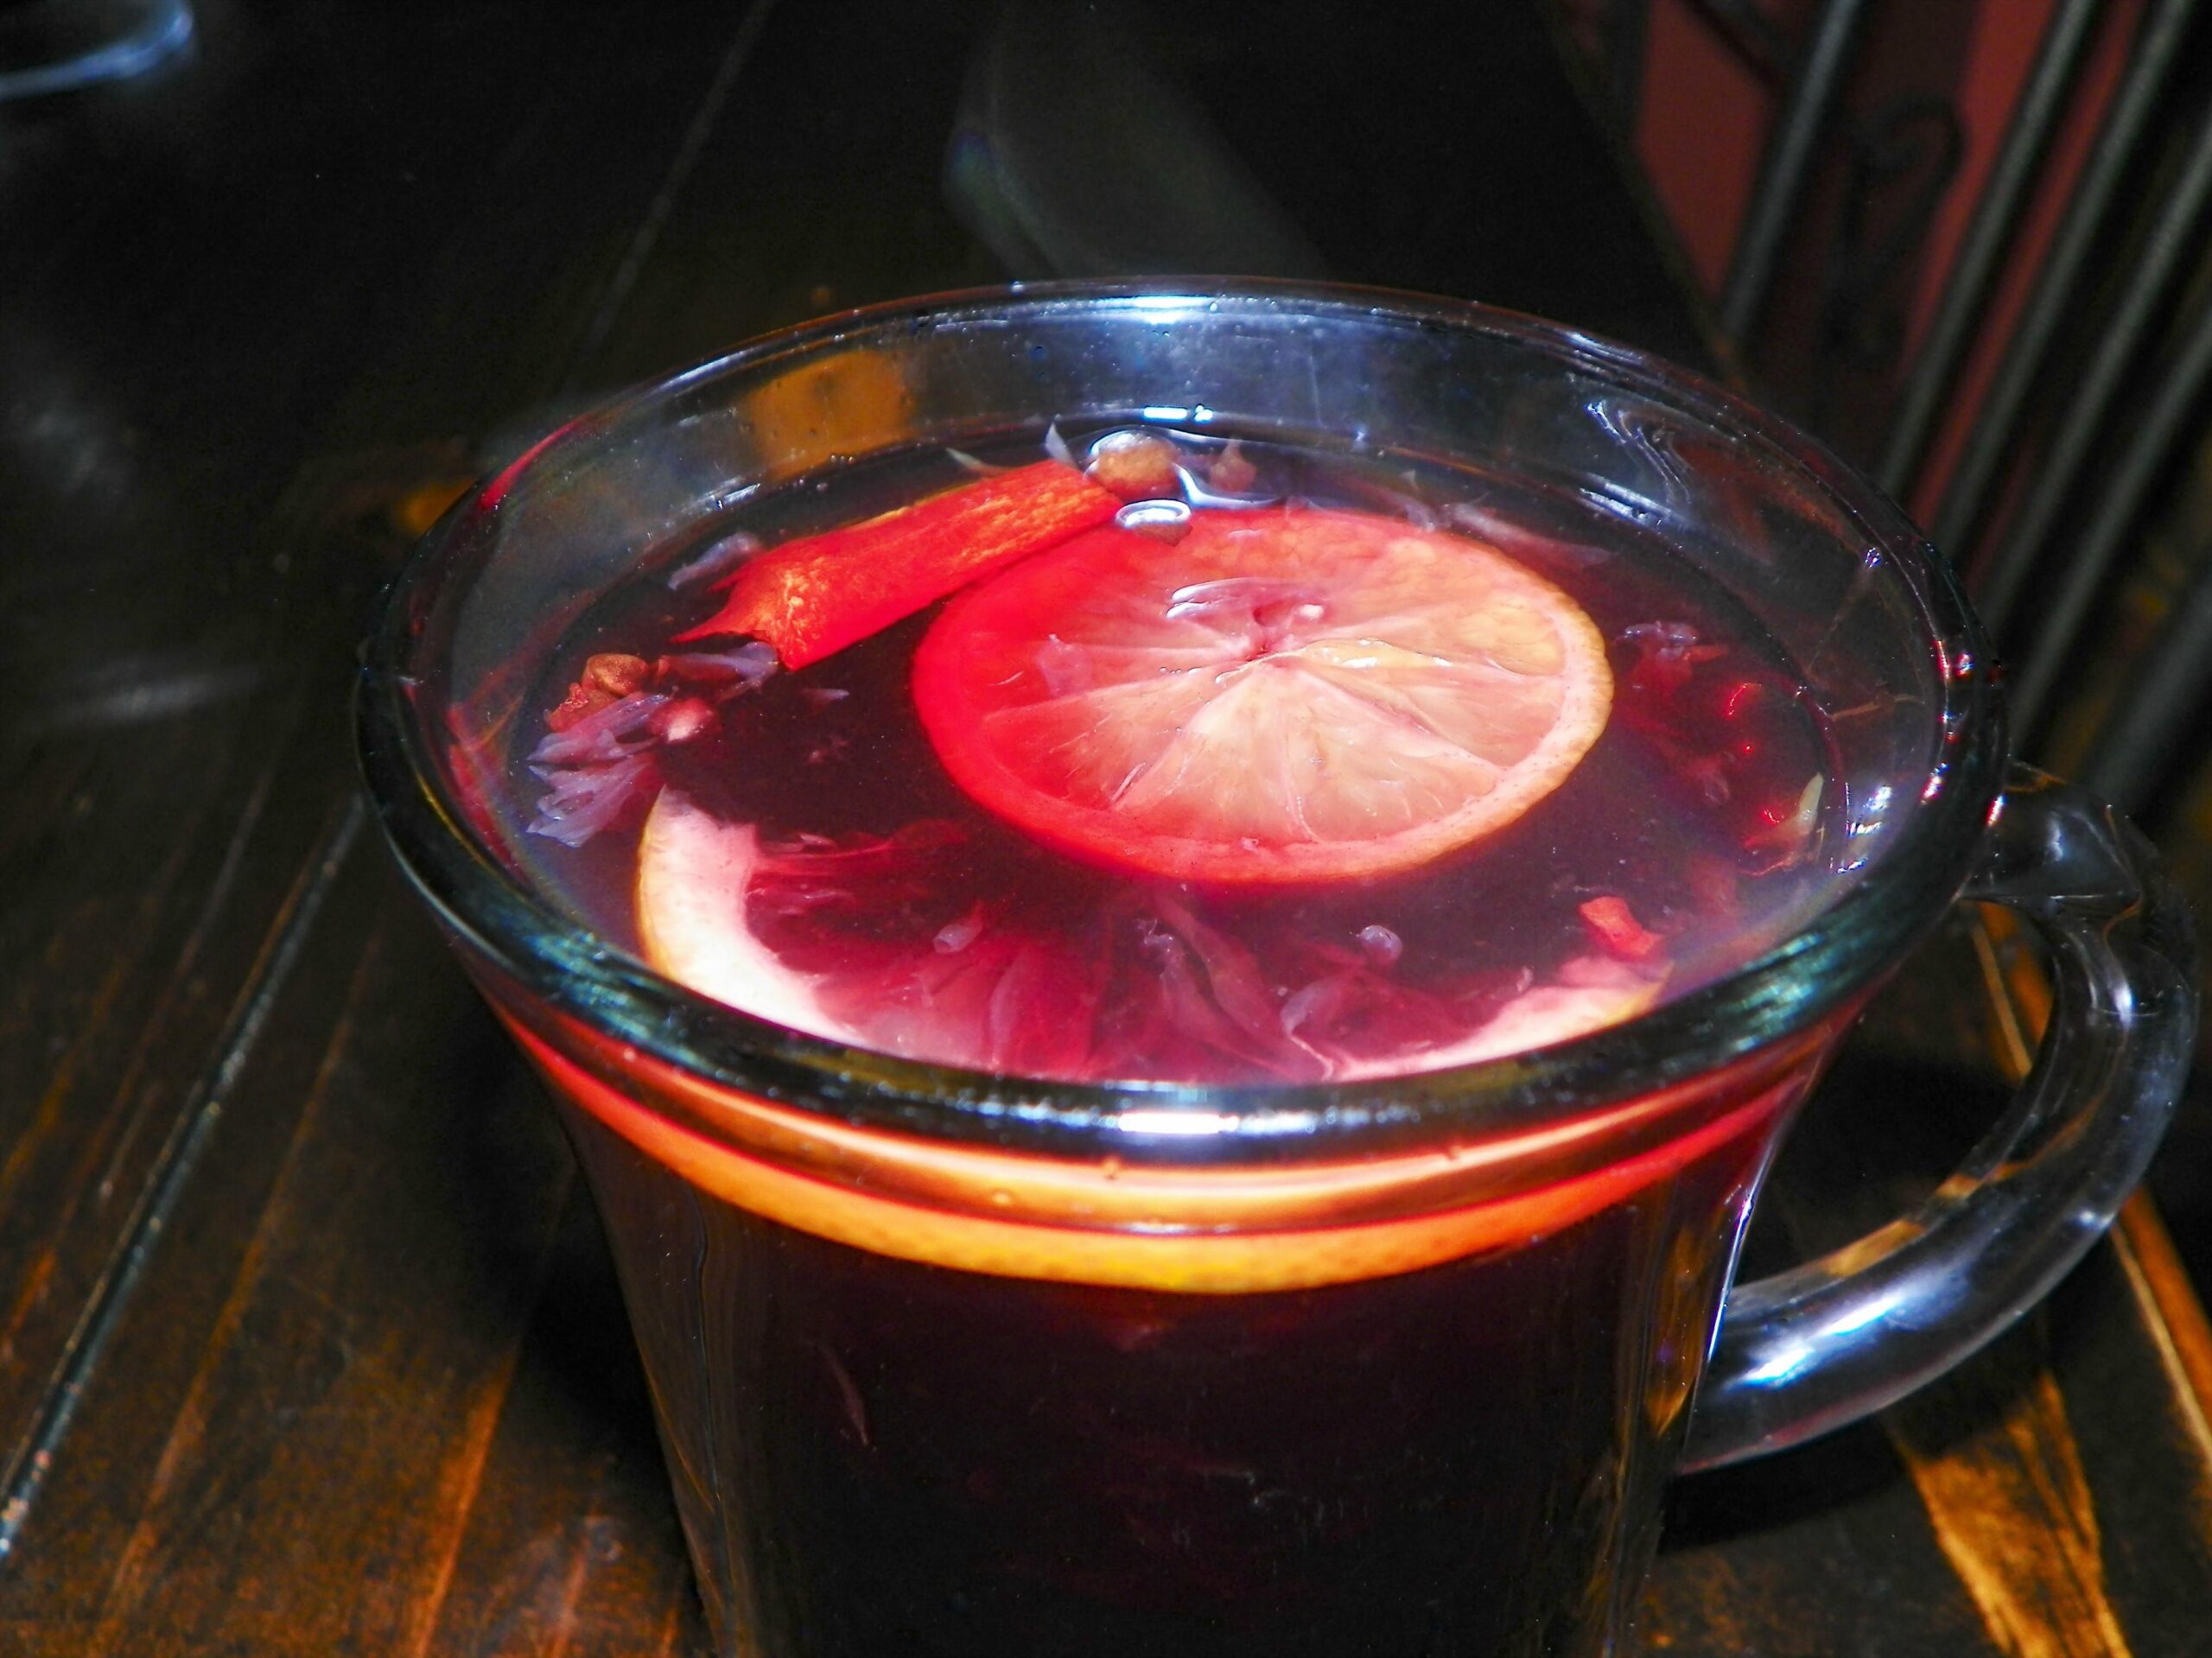  Warm up your winter with a mug of hot spiced wine!